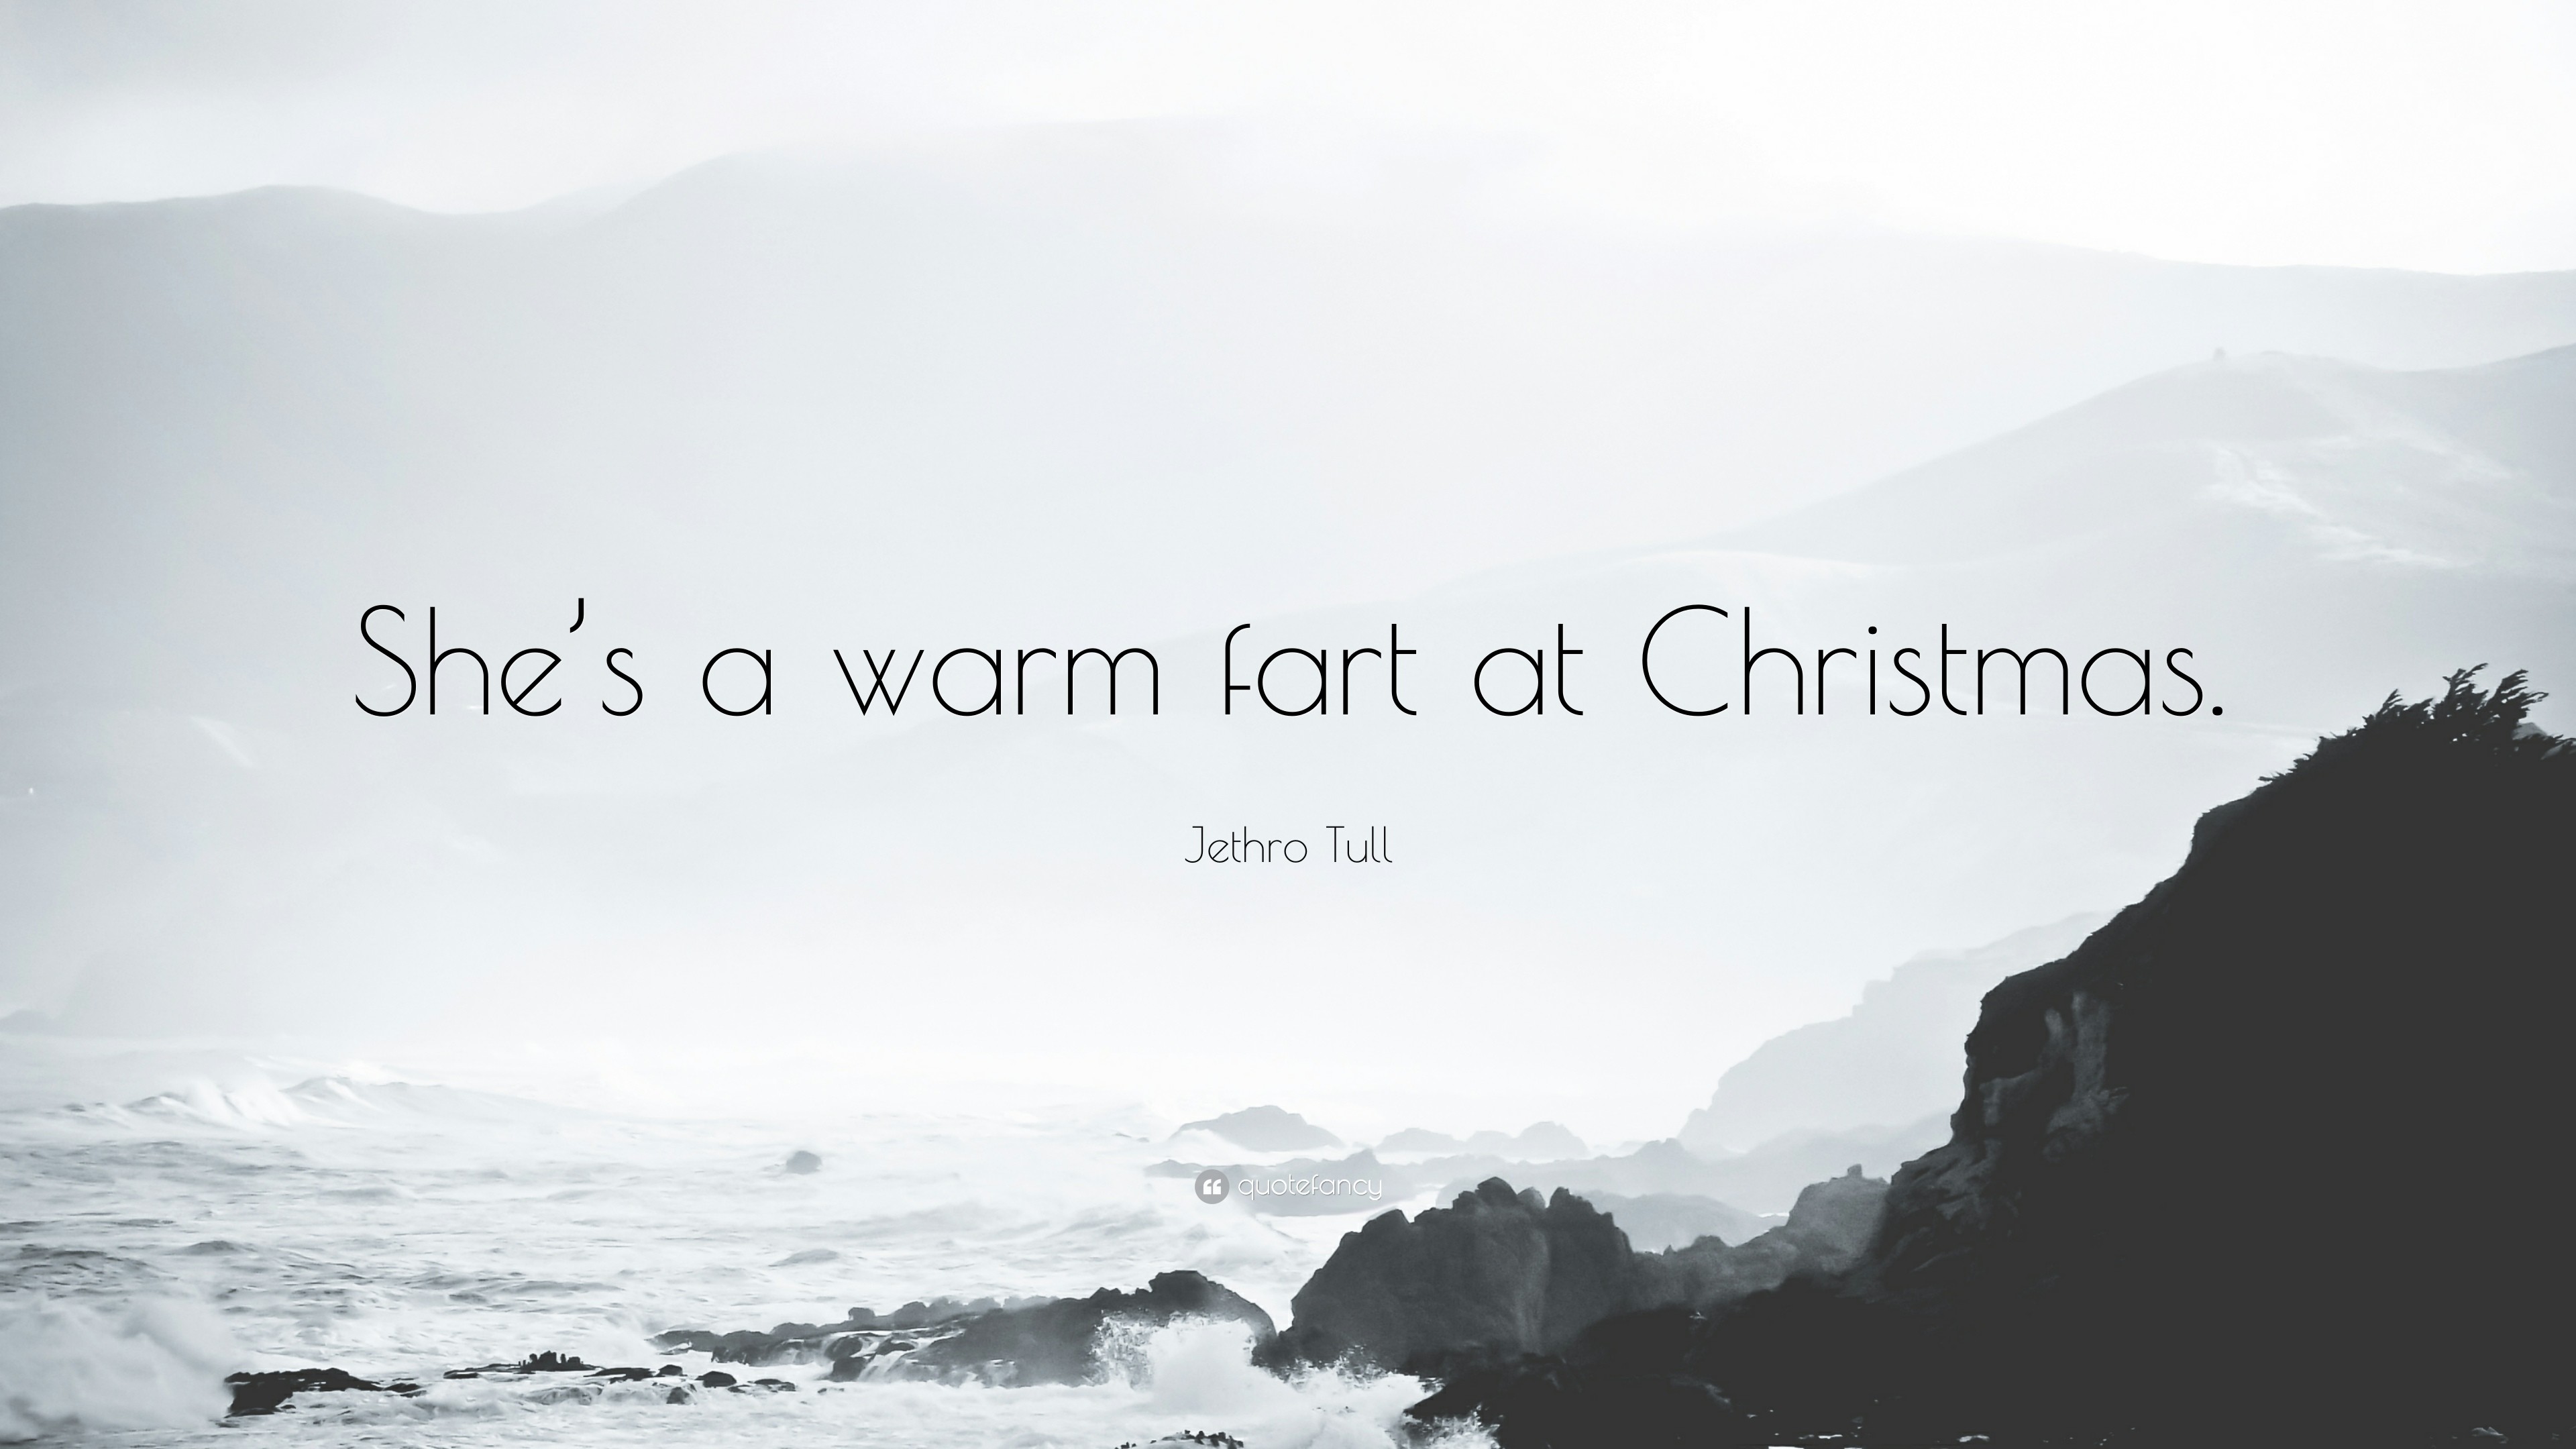 3840x2160 Jethro Tull Quote: “She's a warm fart at Christmas.”